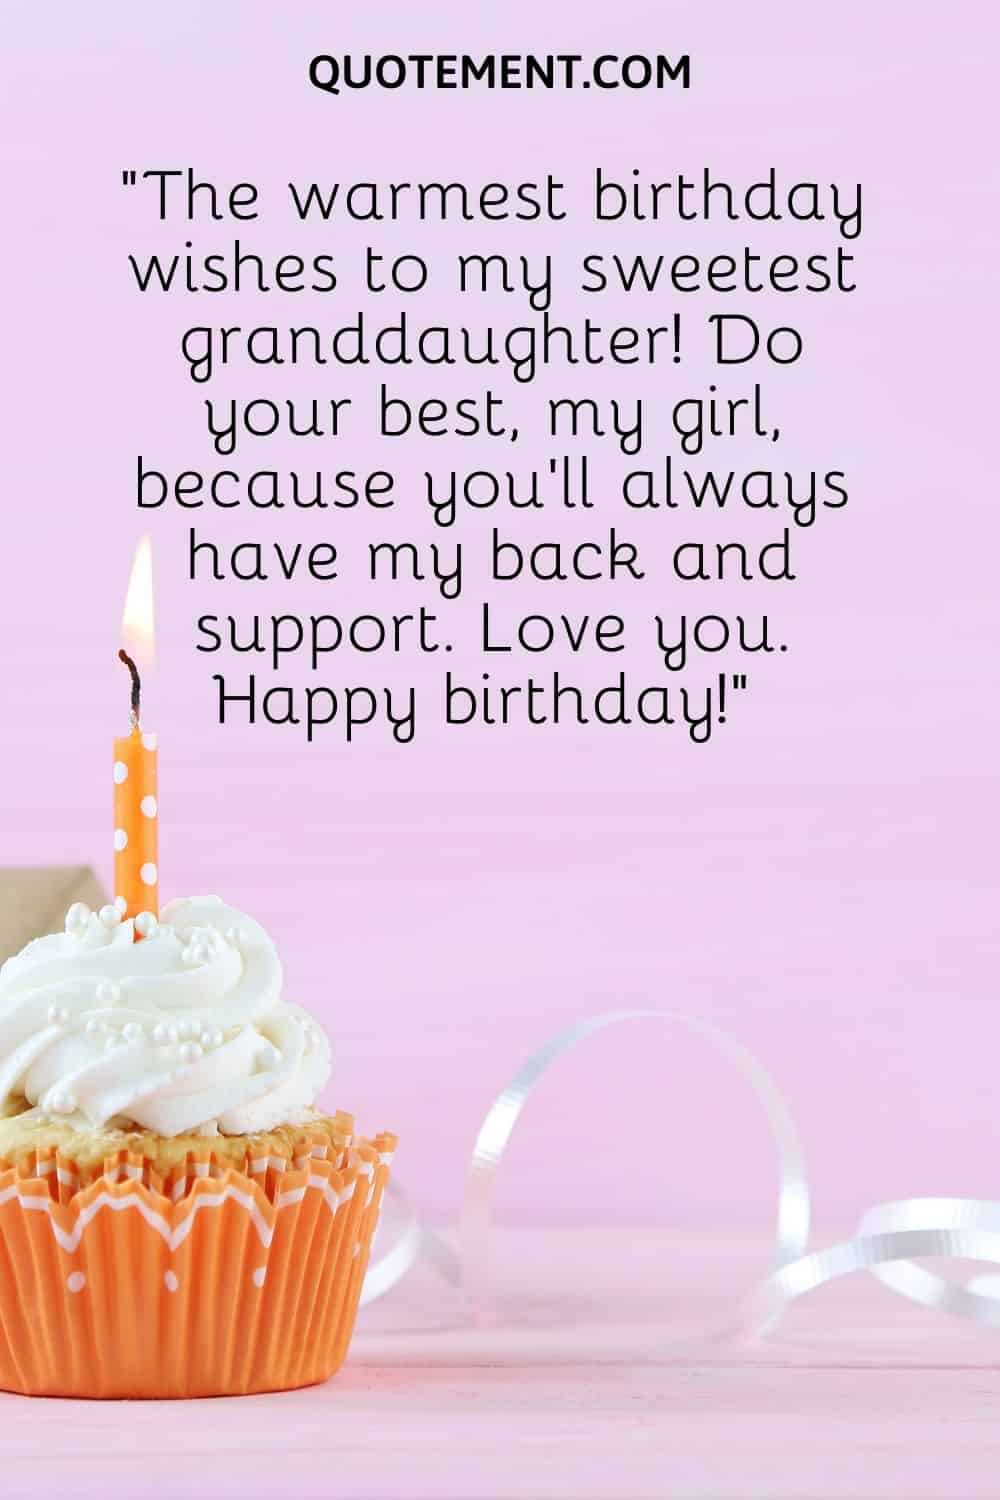 The warmest birthday wishes to my sweetest granddaughter